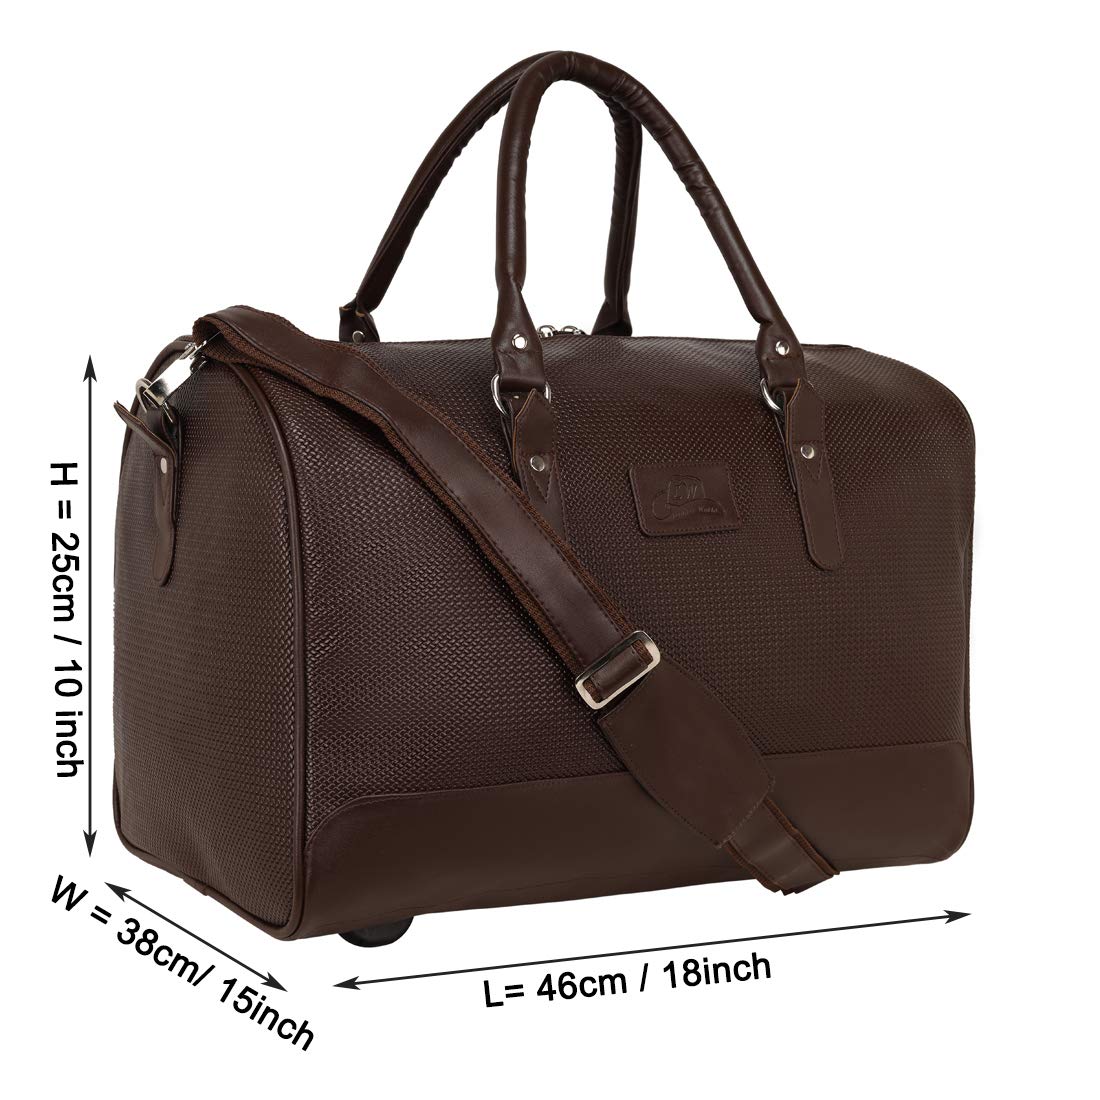 Leather World High Capacity Travel Bag Luggage Unisex Leisure Fitness Weekend Bag Business Suitcase Soft Vegan Leather Travel Duffels Shoulder Bags